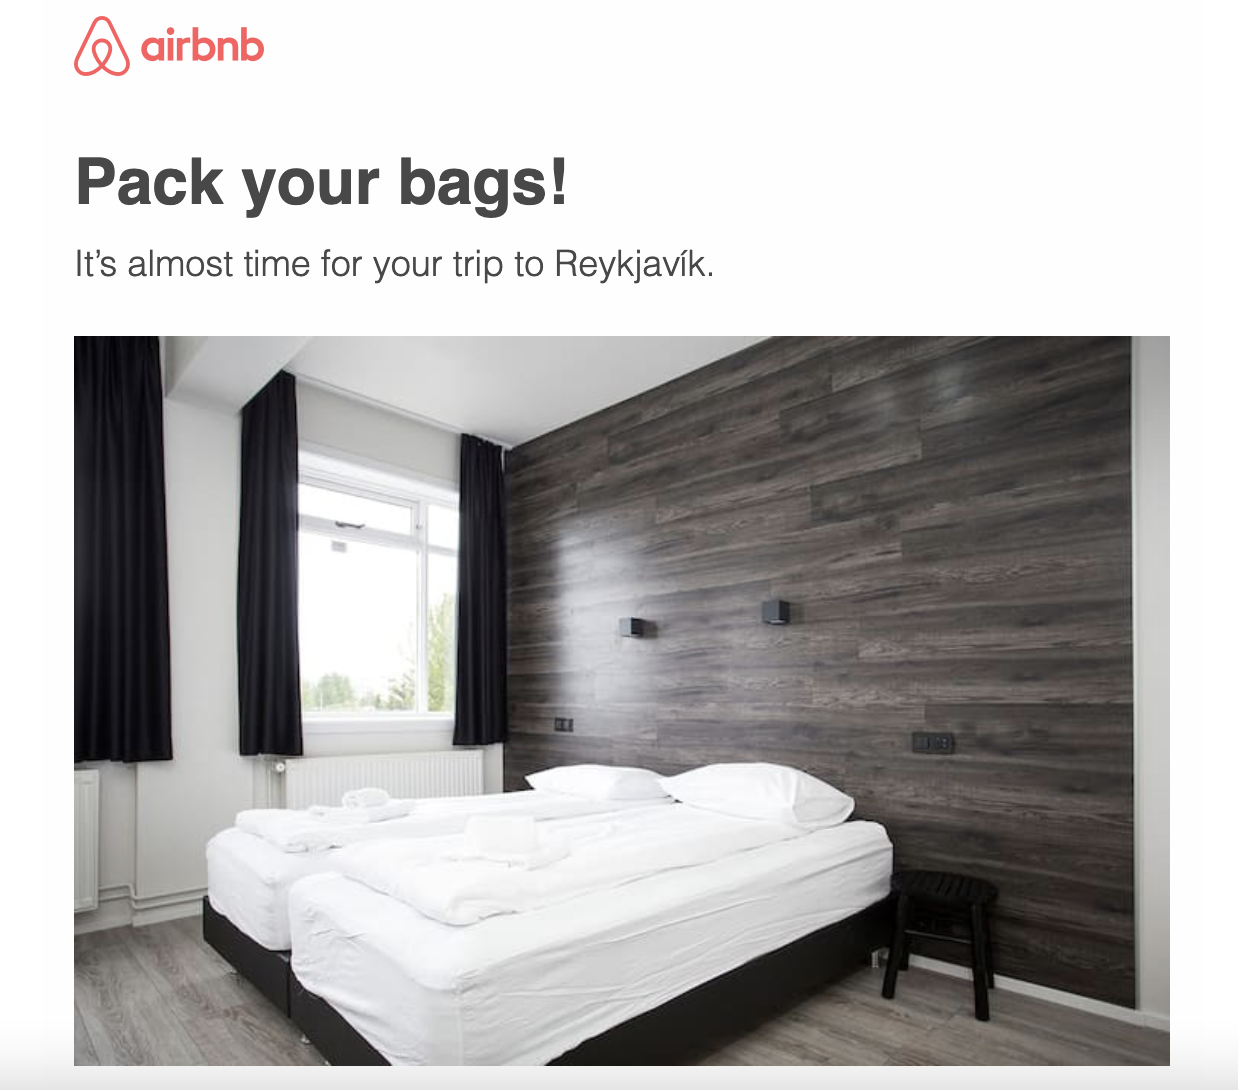 Airbnb order confirmation email